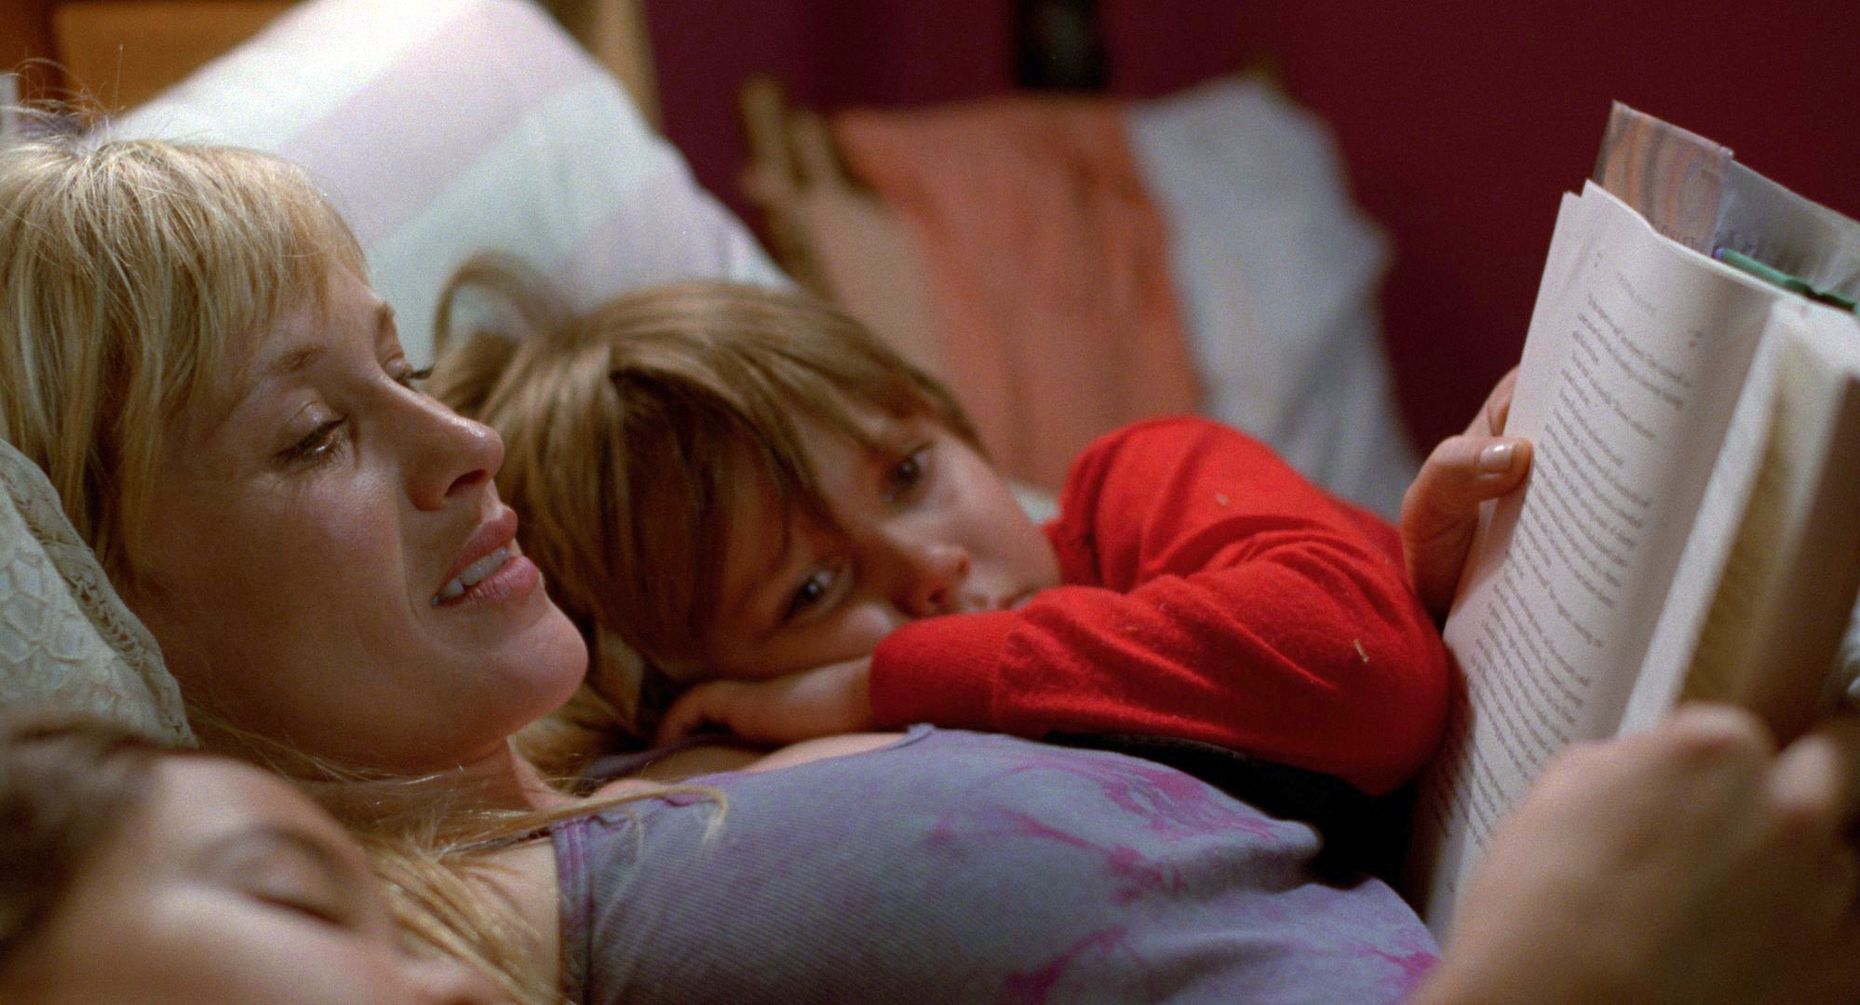 <p>When director Richard Linklater called Patricia Arquette to offer her the role of a mother in this film shot over 12 years, Patricia Arquette <a href="https://www.npr.org/2015/01/13/376746926/the-magic-of-the-boyhood-experiment-time-and-patience" rel="noreferrer noopener">didn’t hesitate</a>. Released in 2014, this film follows a divorced mother and her two children for over a decade. The ambitious project’s mix of <a href="https://variety.com/2015/film/awards/groundbreaking-boyhood-evolved-as-a-process-with-no-plan-b-1201431631/" rel="noreferrer noopener">fiction and reality</a> made headlines, primarily because the actors age authentically in front of the camera. The role earned Patricia Arquette multiple awards, including an Oscar for best supporting actress, a BAFTA, and a Golden Globe.</p>